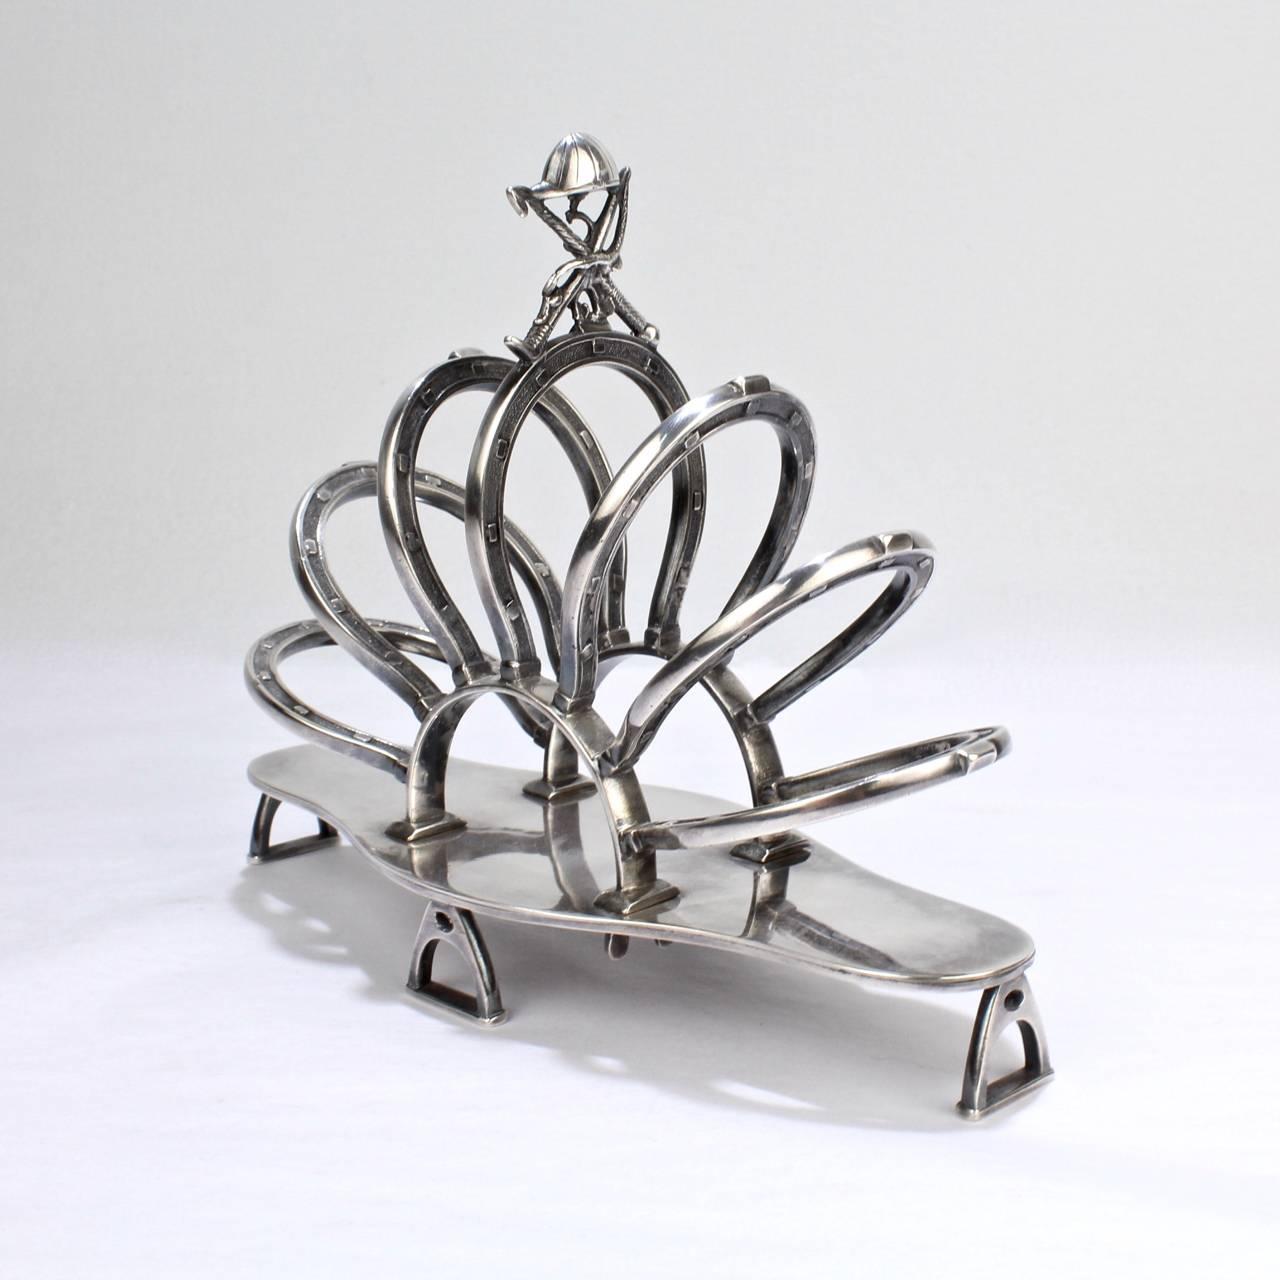 Women's or Men's Antique English Equestrian Silver Plated Toast or Letter Rack with Horseshoes